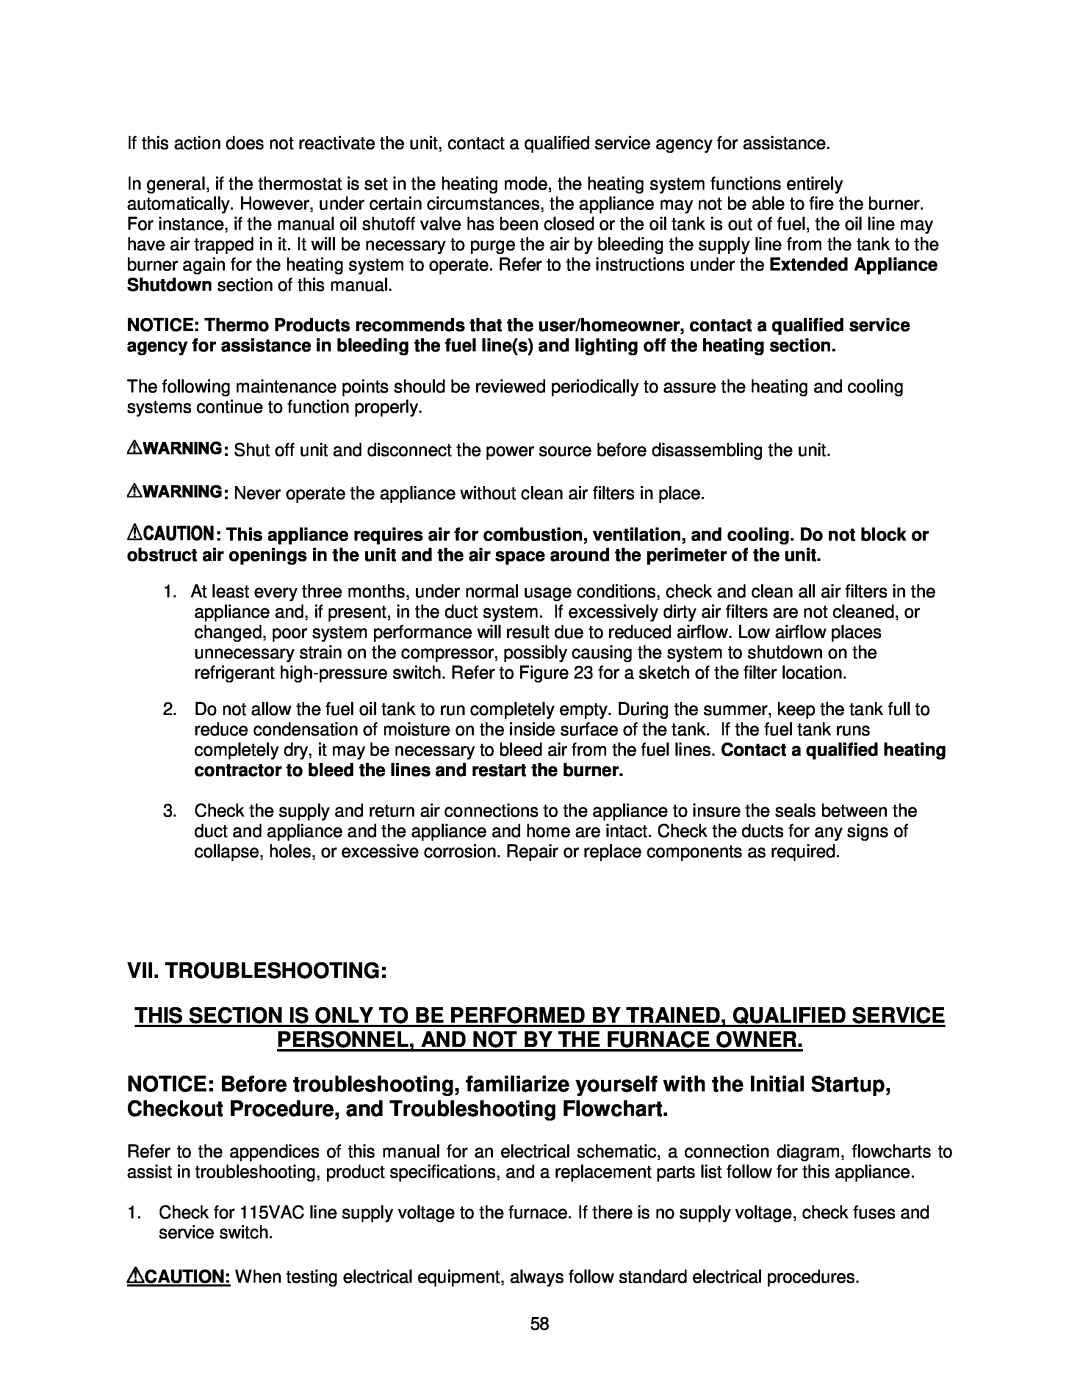 Thermo Products OHFA199DV5R, OHFA199DV5B operation manual Vii. Troubleshooting, Personnel, And Not By The Furnace Owner 